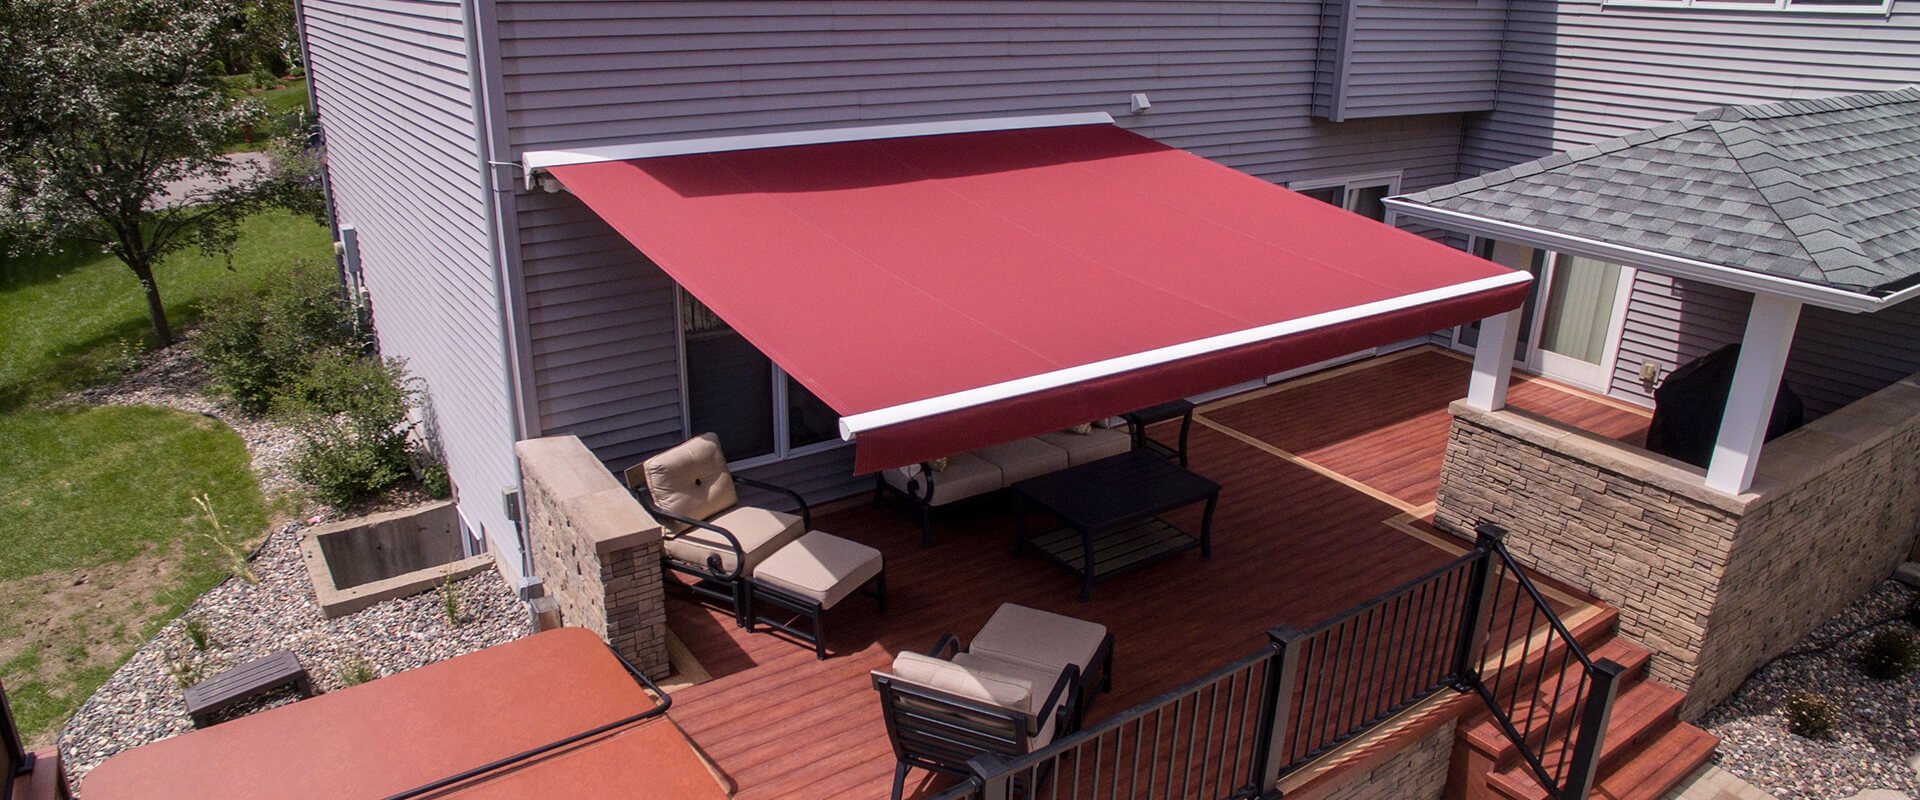 How Long Will a Retractable Awning Last?